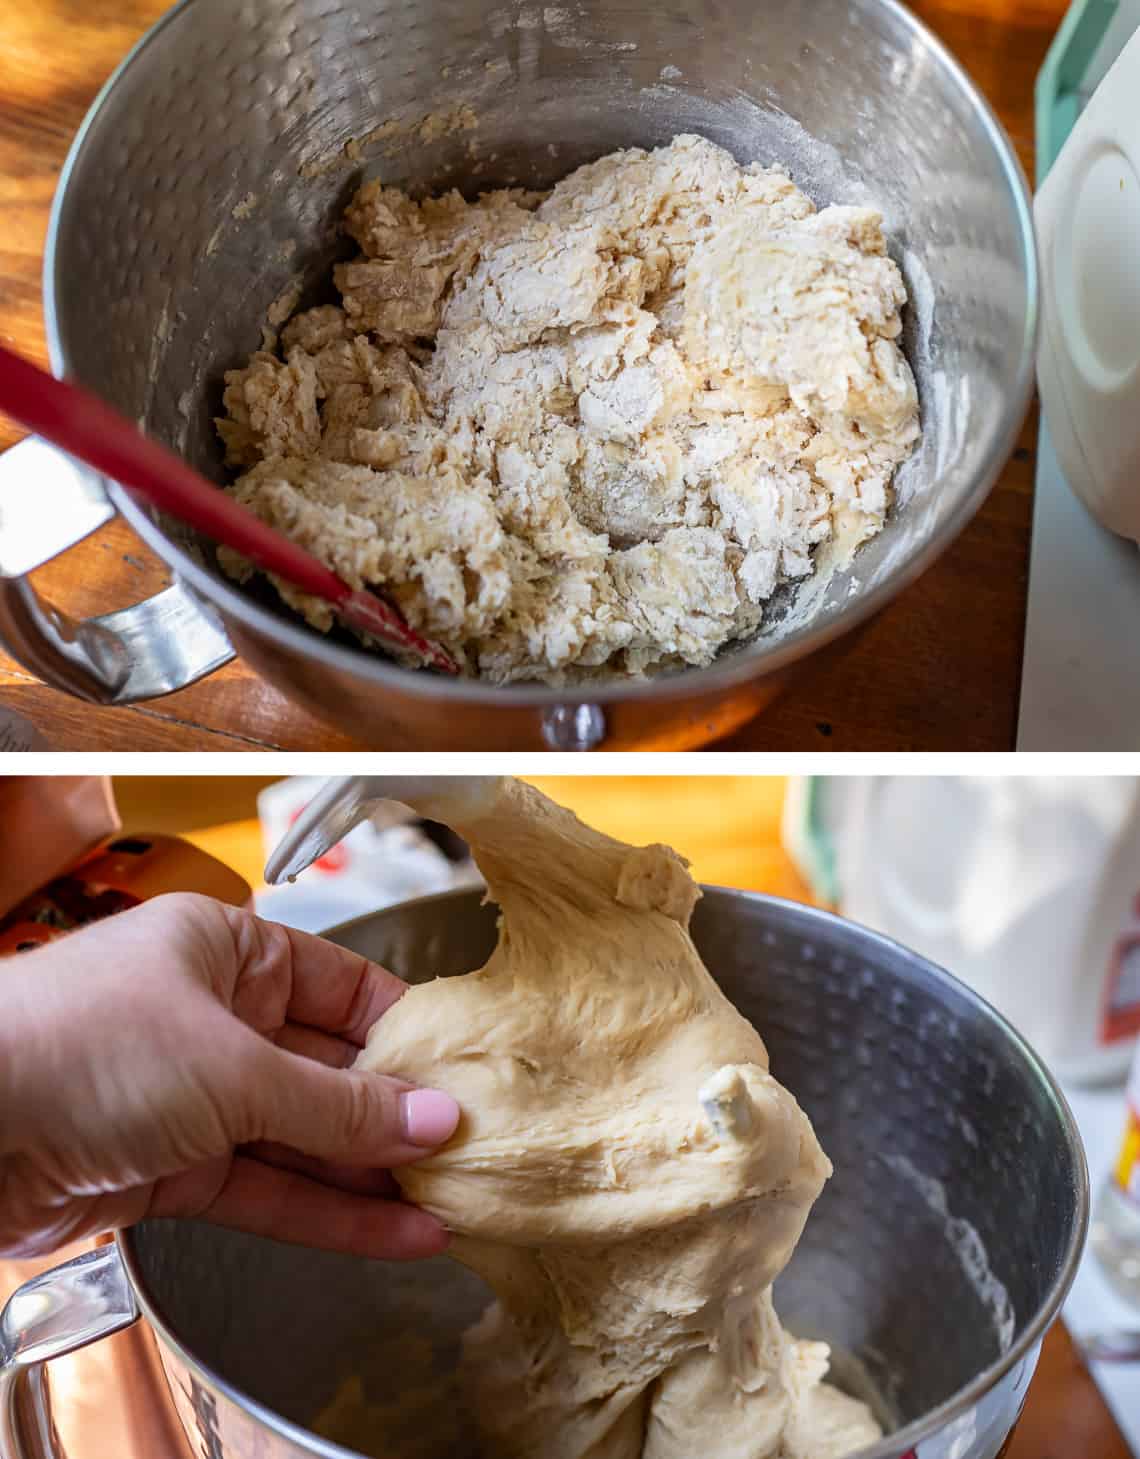 top mixing bowl with barely combined dough and bottom pulling dough ball showing elasticity.